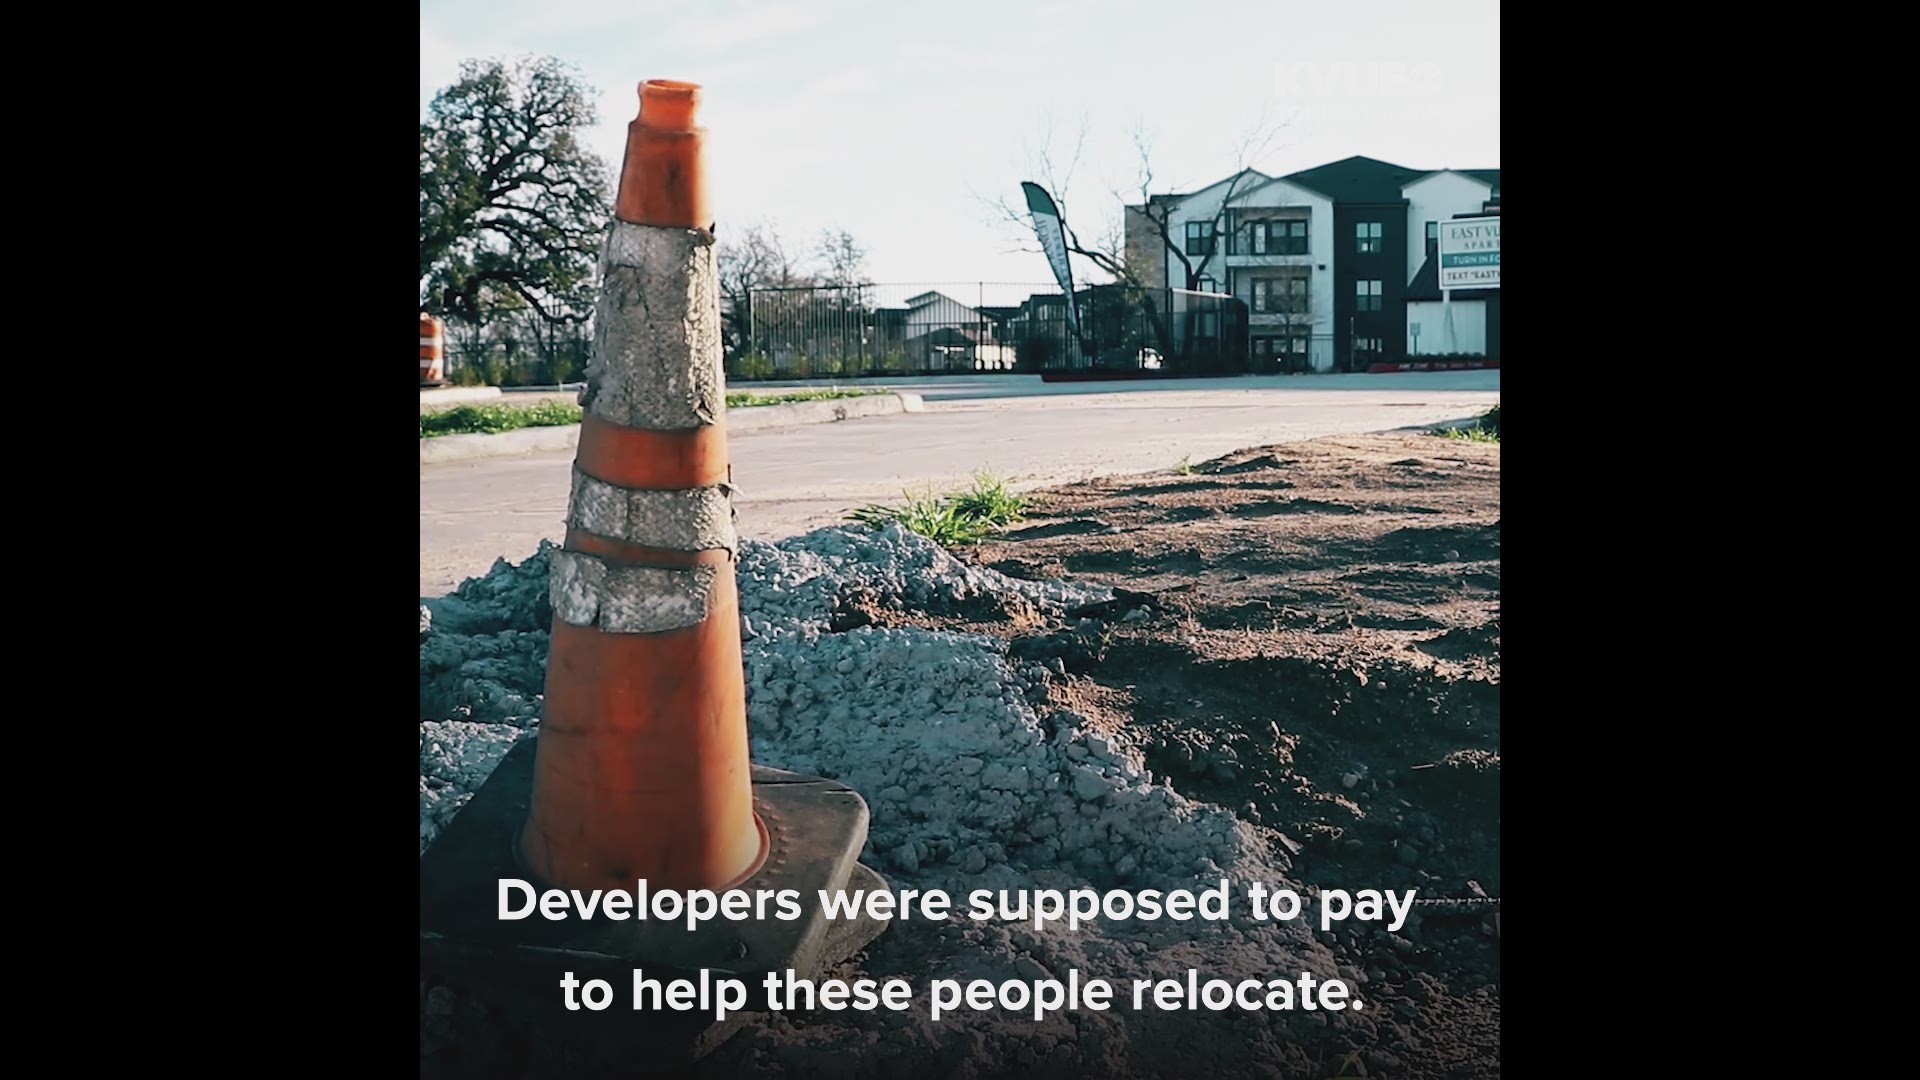 An Austin city ordinance requires developers to pay to help relocate families.